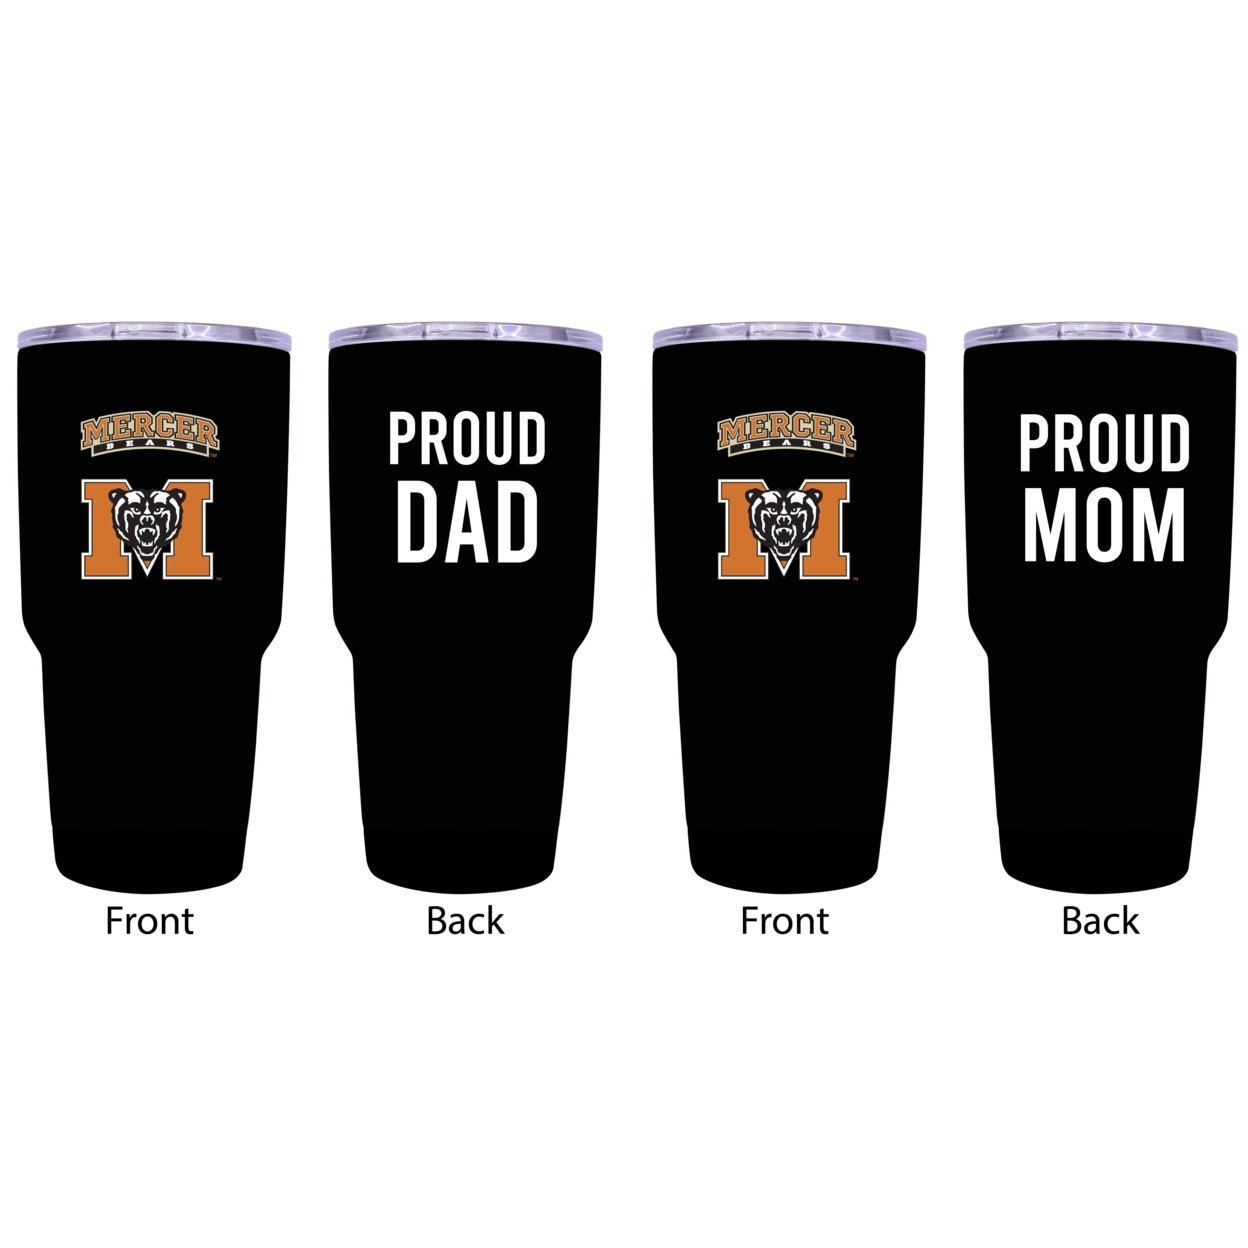 Mercer University Proud Mom And Dad 24 Oz Insulated Stainless Steel Tumblers 2 Pack Black.